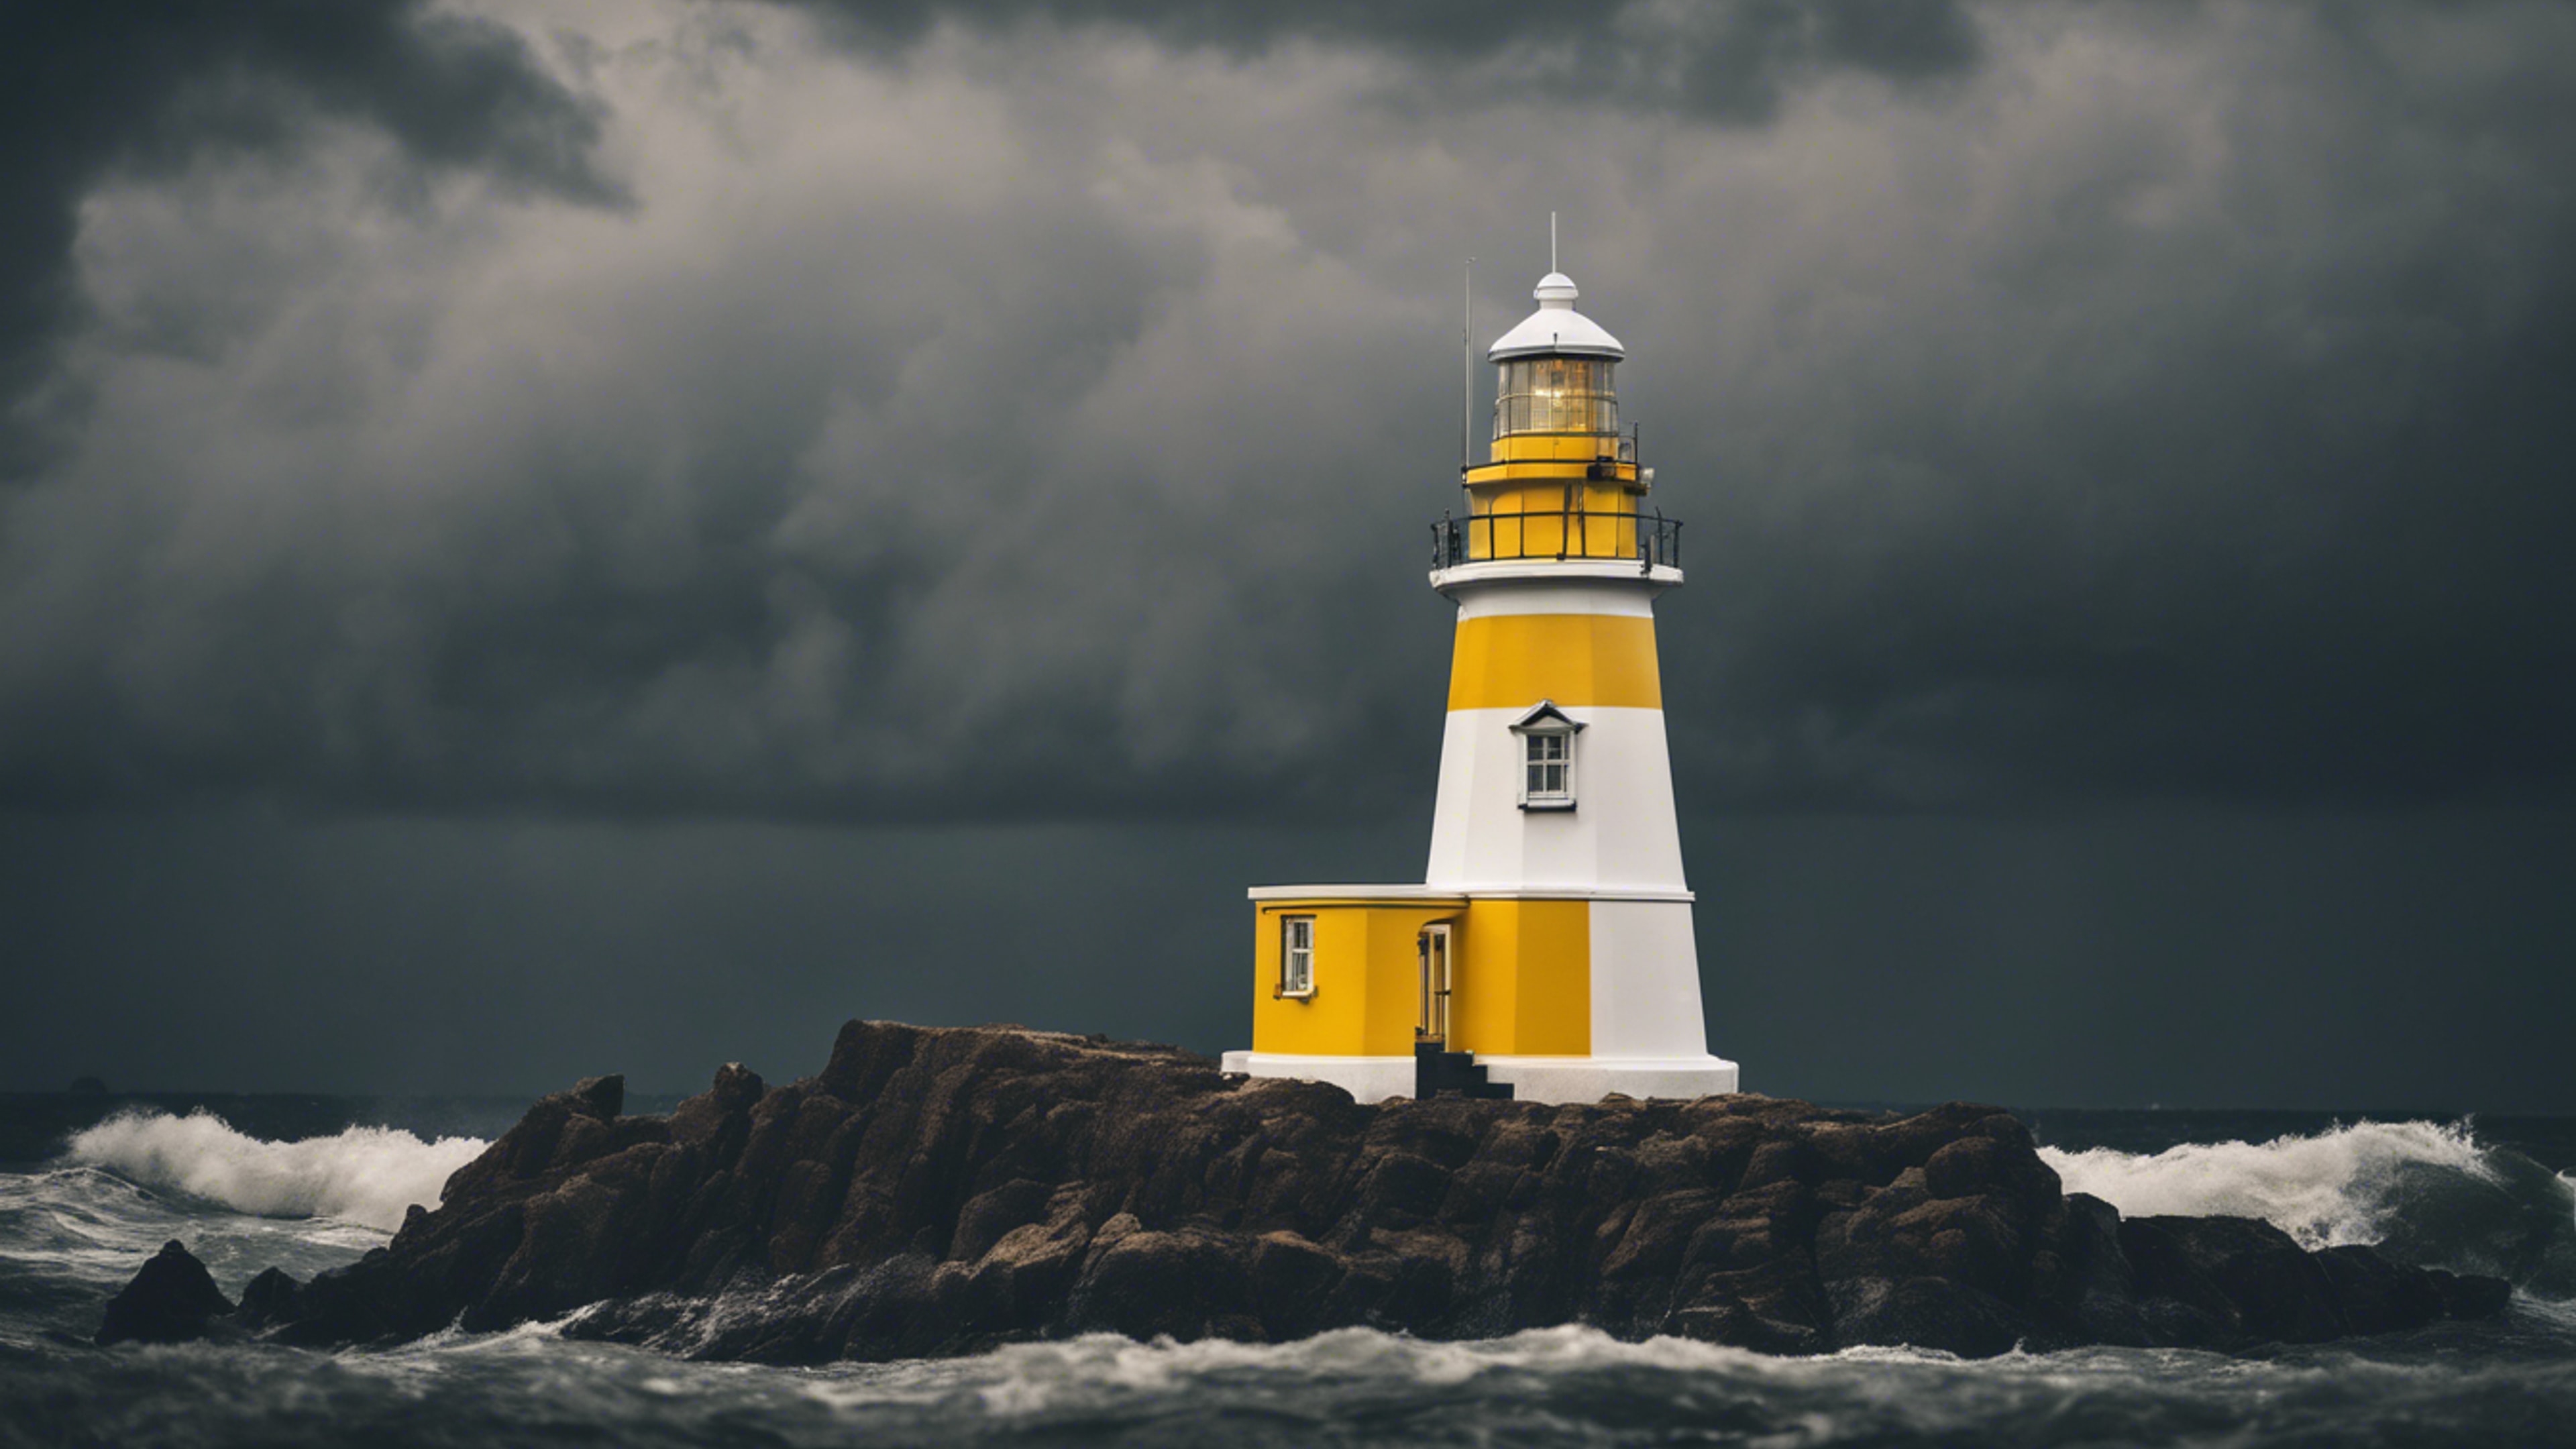 A white and yellow striped lighthouse standing tall against a stormy dark sky. Sfondo[29fc73b96f634852baf9]